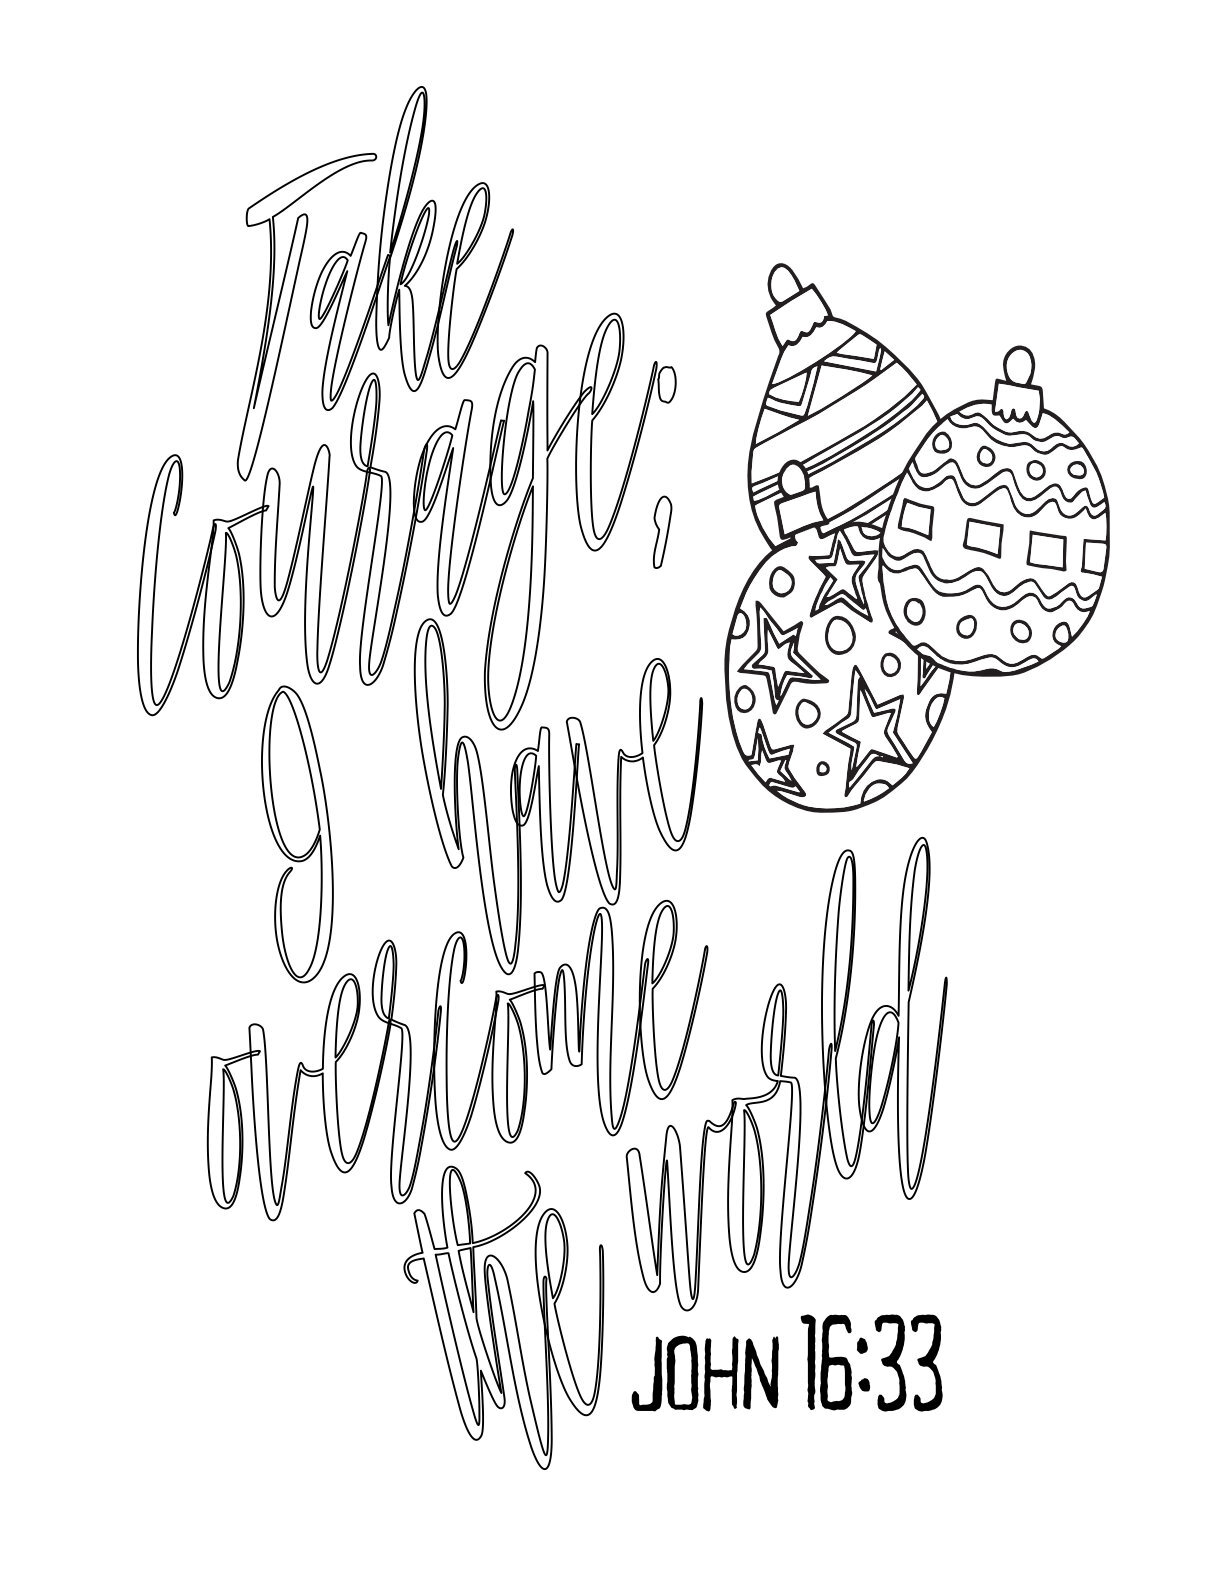 Free Christmas Coloring Page - I Have Overcome the World - John 16:33  CLICK HERE TO DOWNLOAD YOUR FREE SIMPLE ADVENT COLORING PAGE